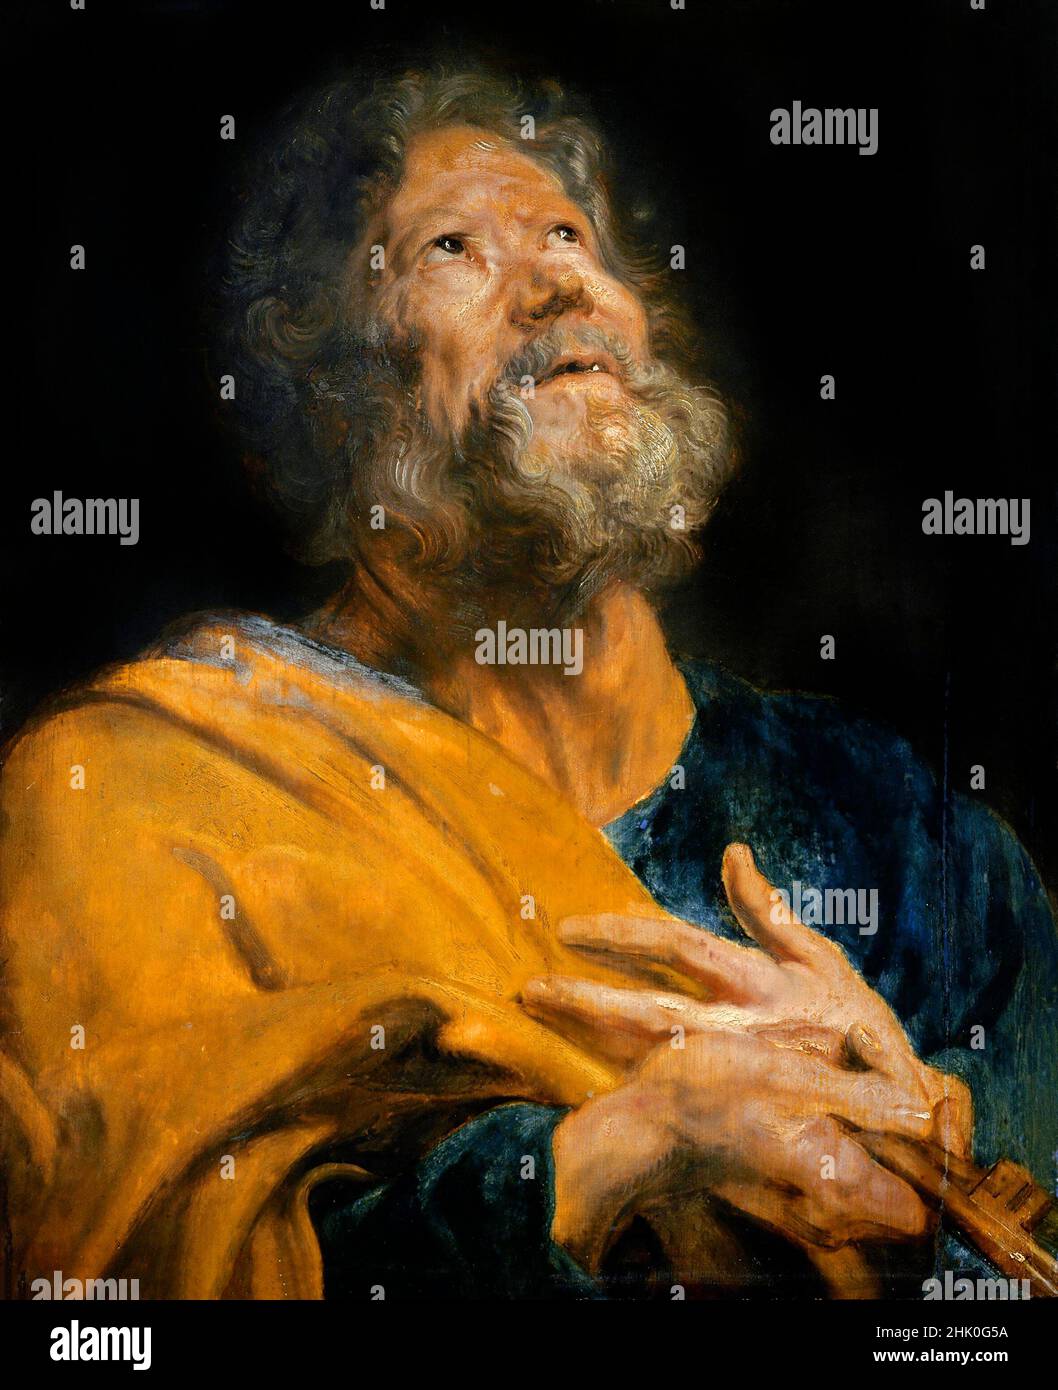 St Peter the Apostle by Sir Anthony van Dyck (1599-1641), oil on wood panel Stock Photo